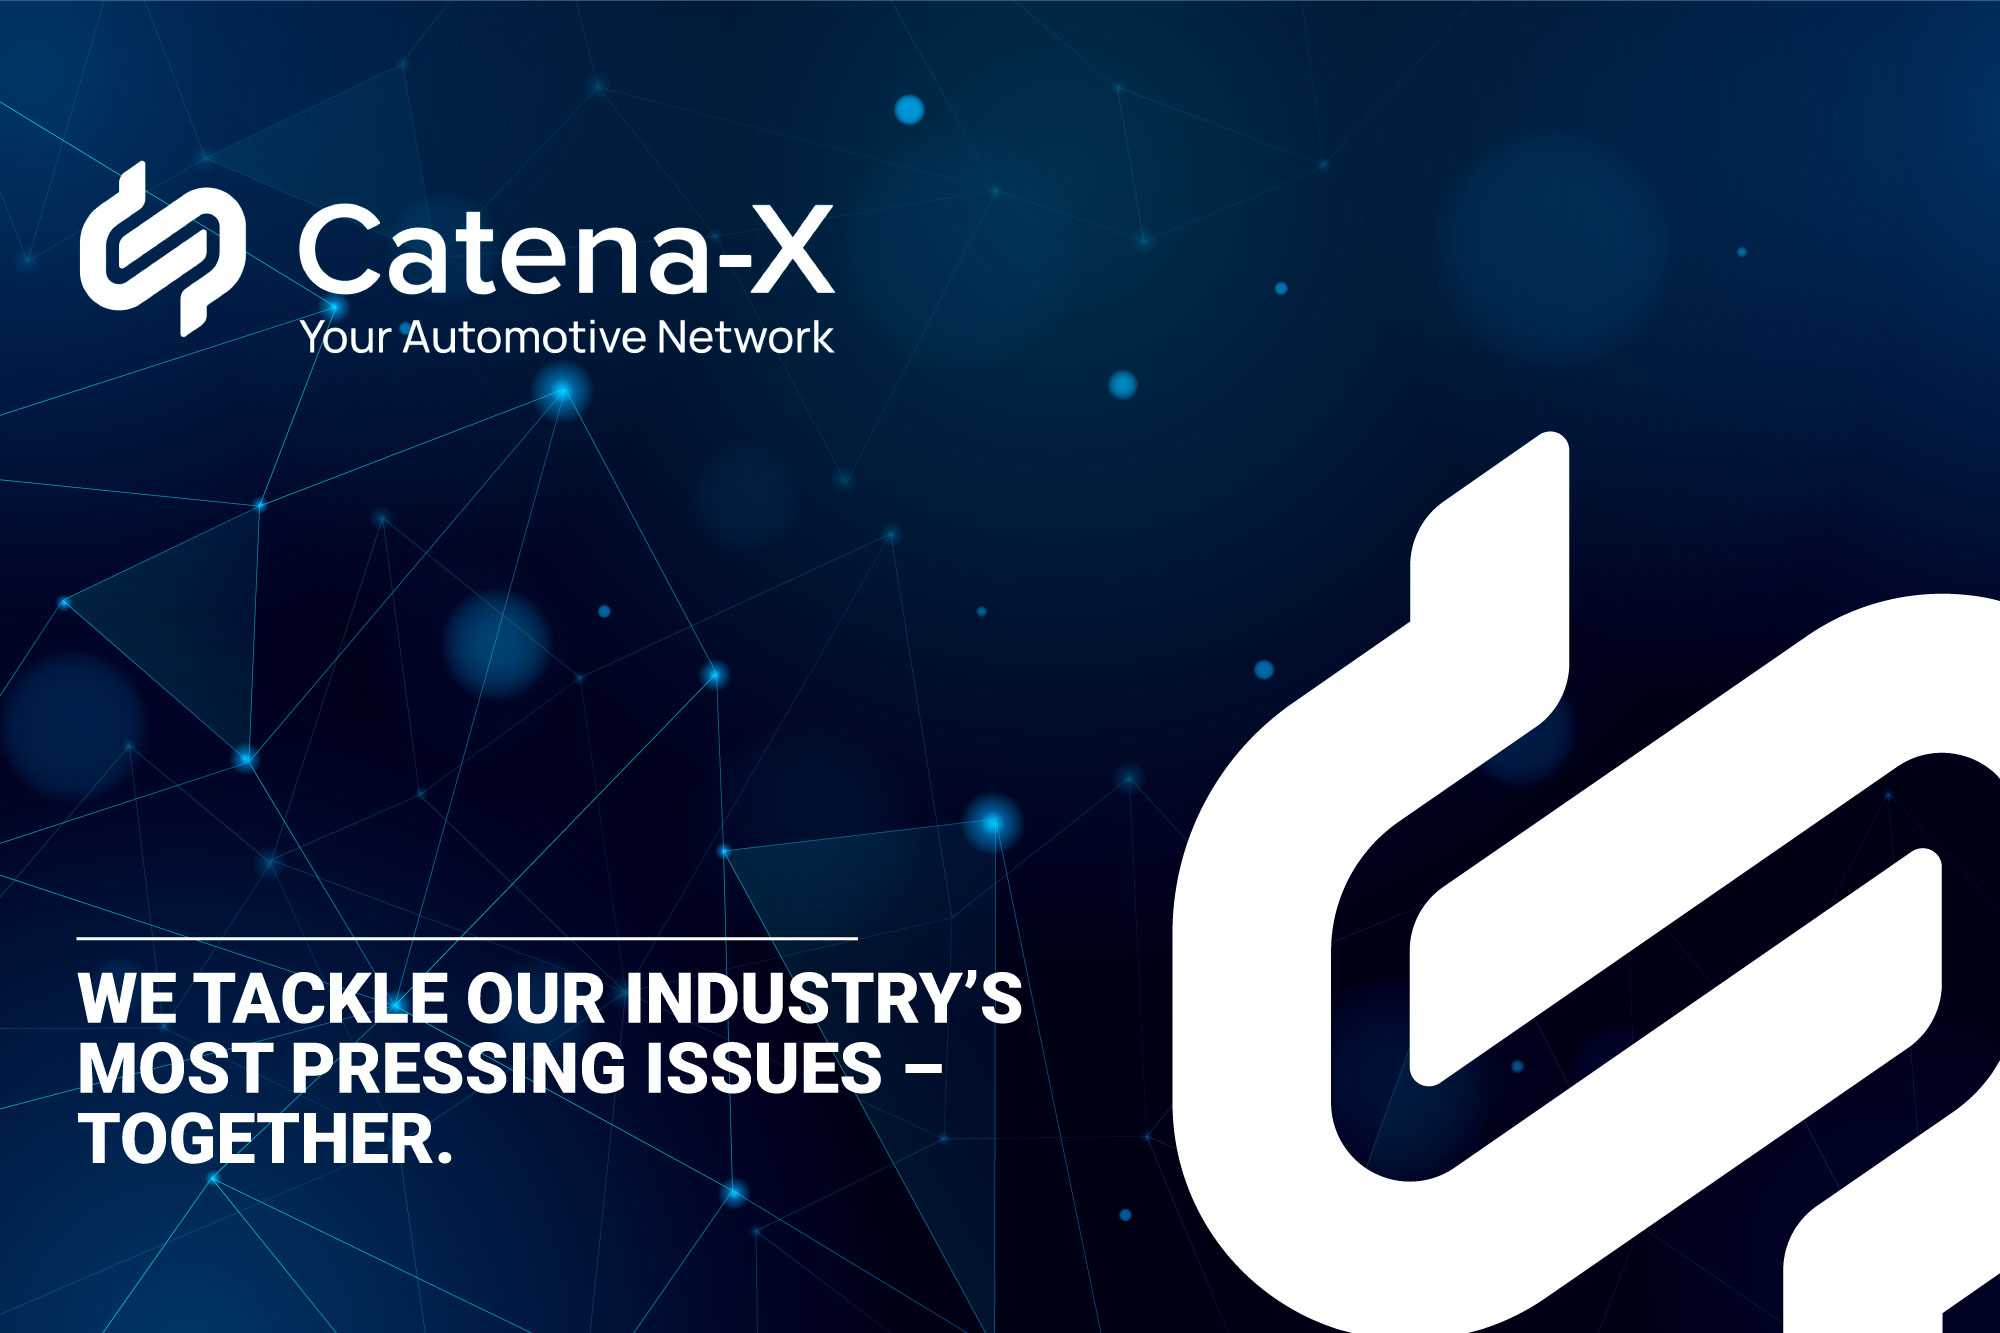 BMW Group enters next phase with Catena-X: carbon measurements from raw material through to end product modelled in a data chain for the first time.